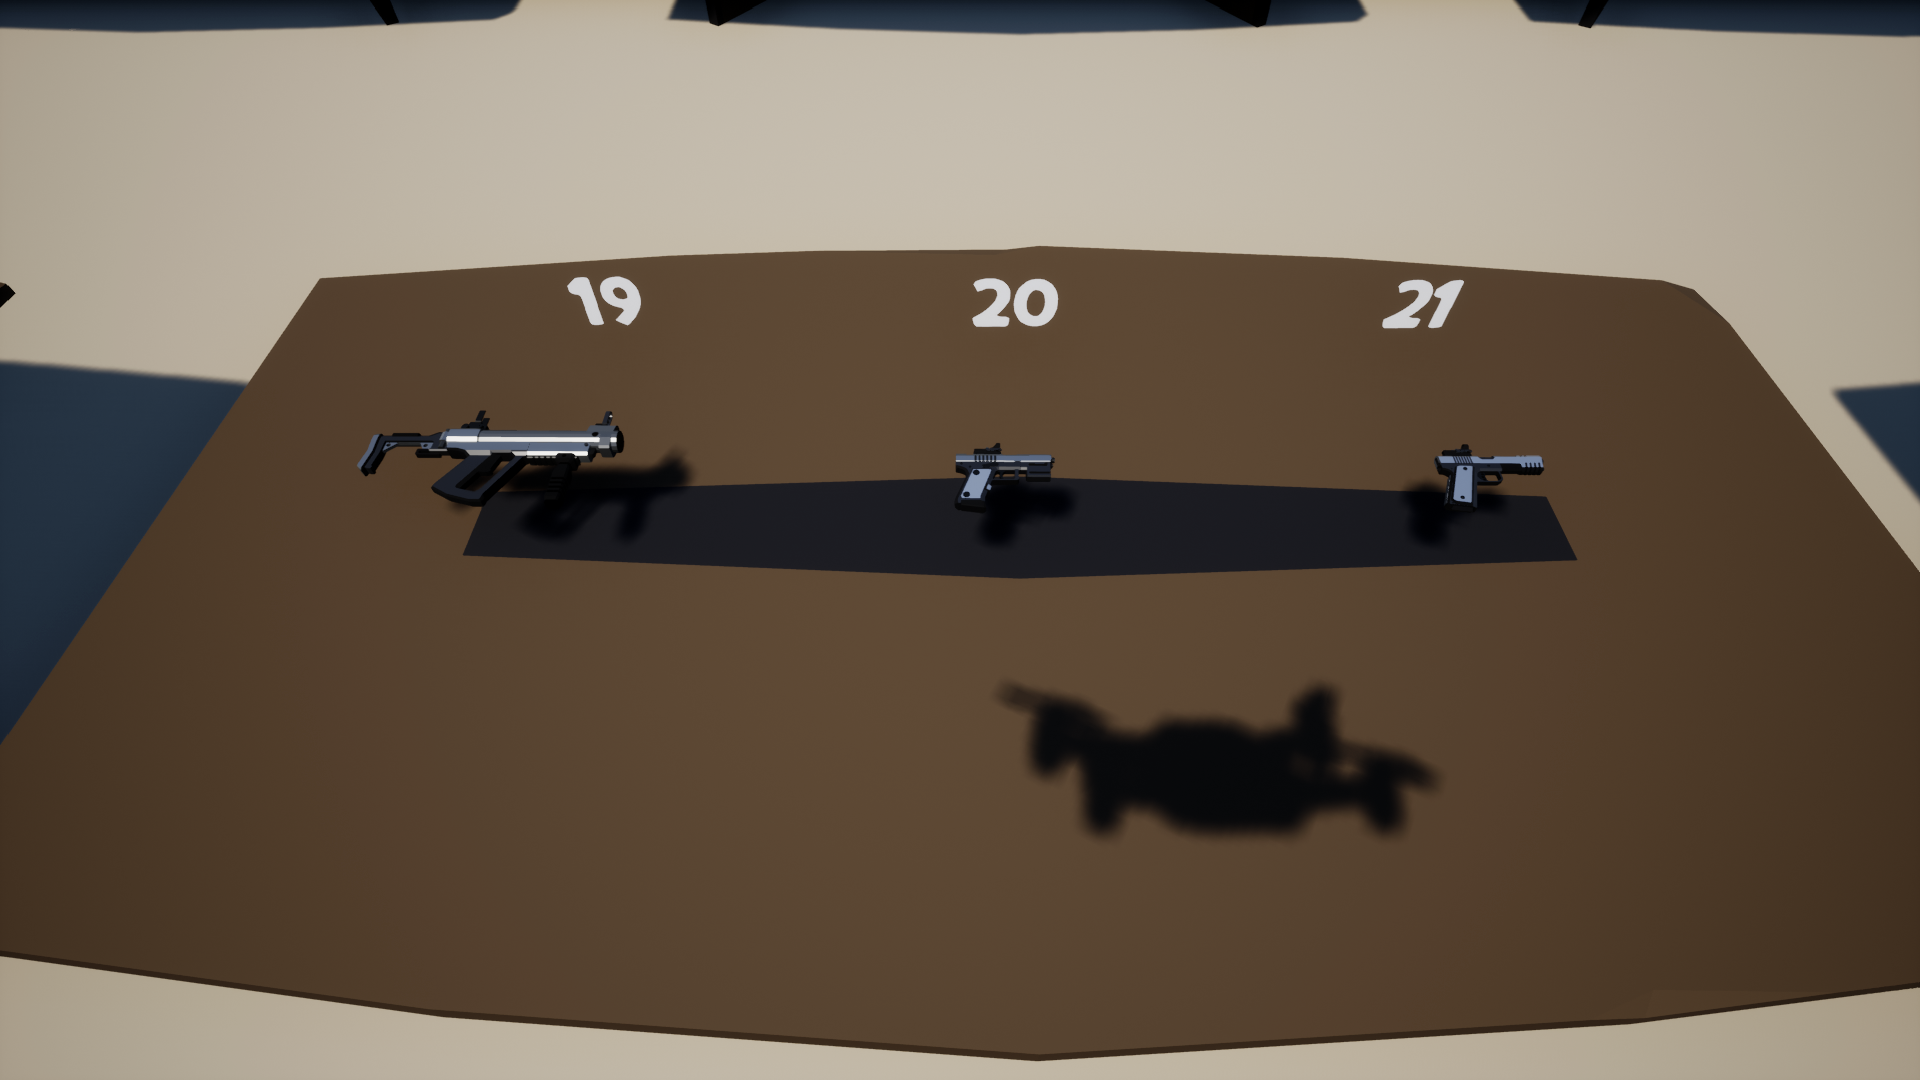 Perfect Heist 2 Level Editor Weapon Variant Selection - Weapons 19, 20, 21. - 1530518